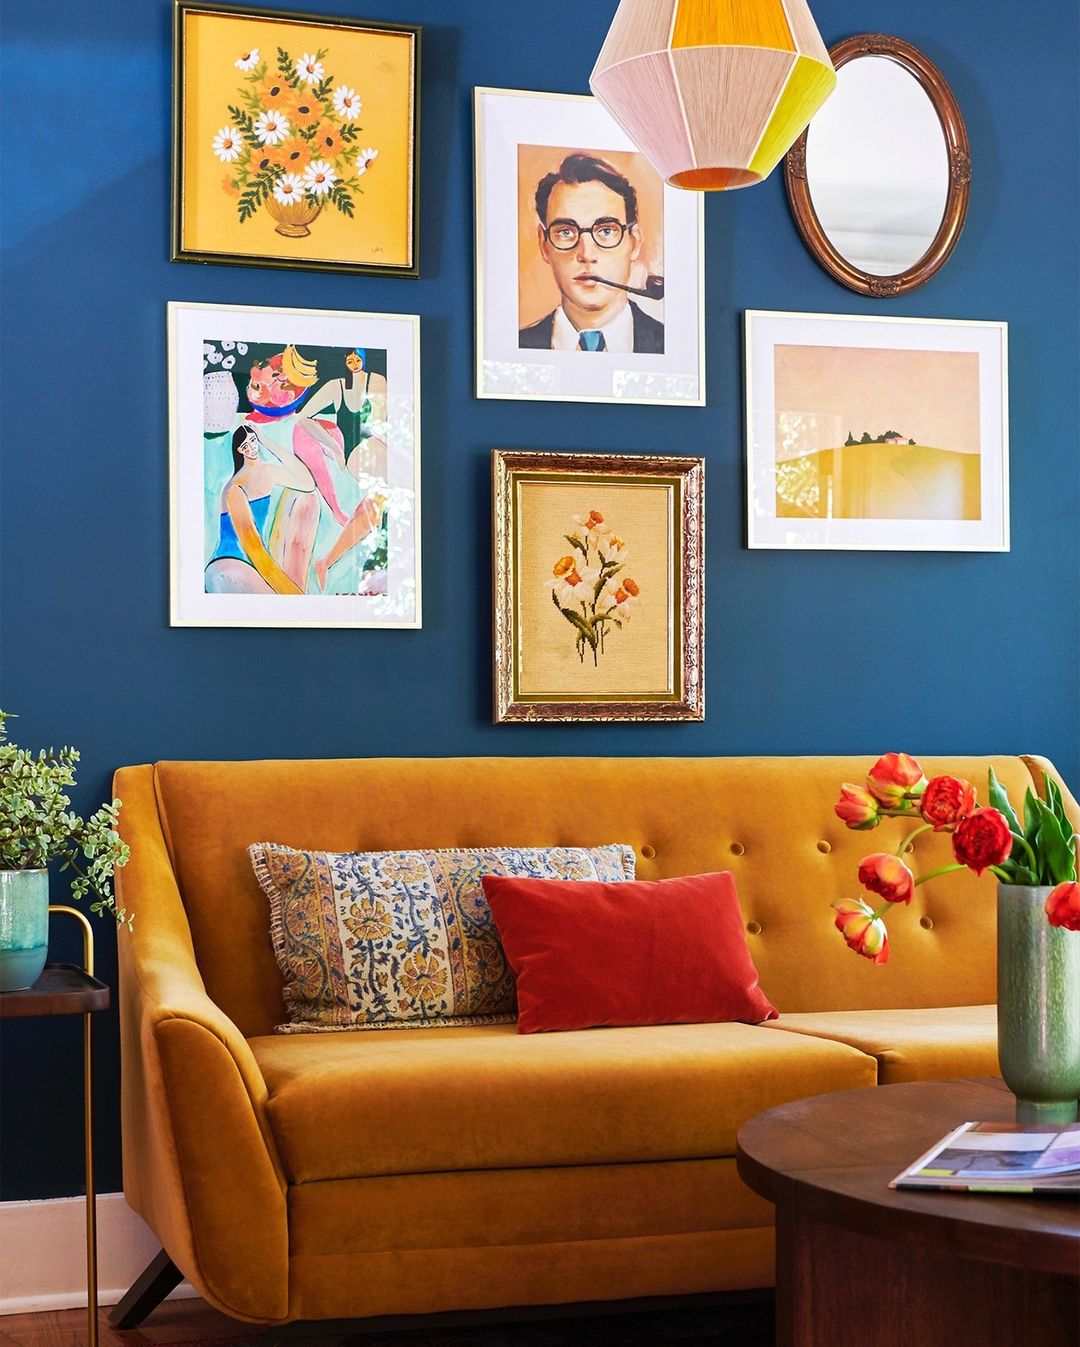 Colorful gallery wall on a blue accent wall above an orange couch. Photo by Instagram user @joybird.